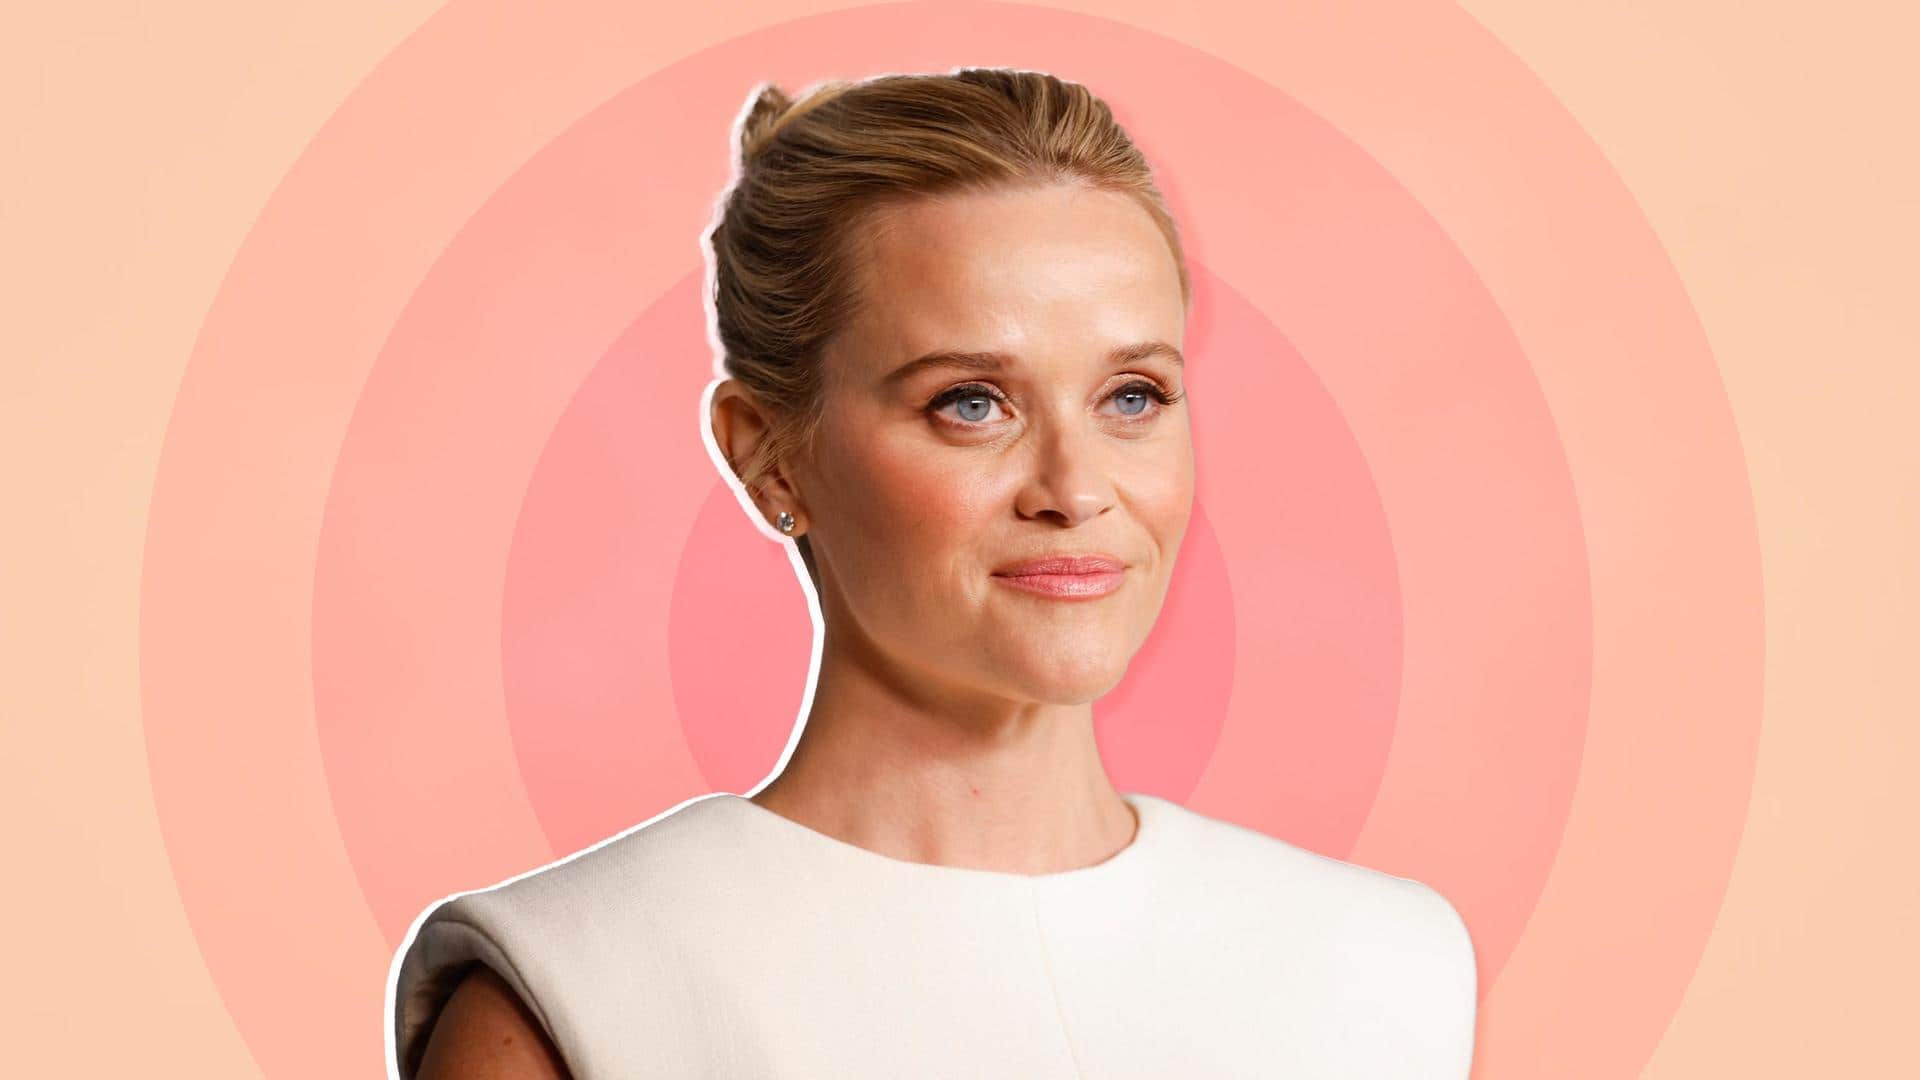 Happy birthday, Reese Witherspoon: 'Legally Blonde' actor's top 5 romcoms 